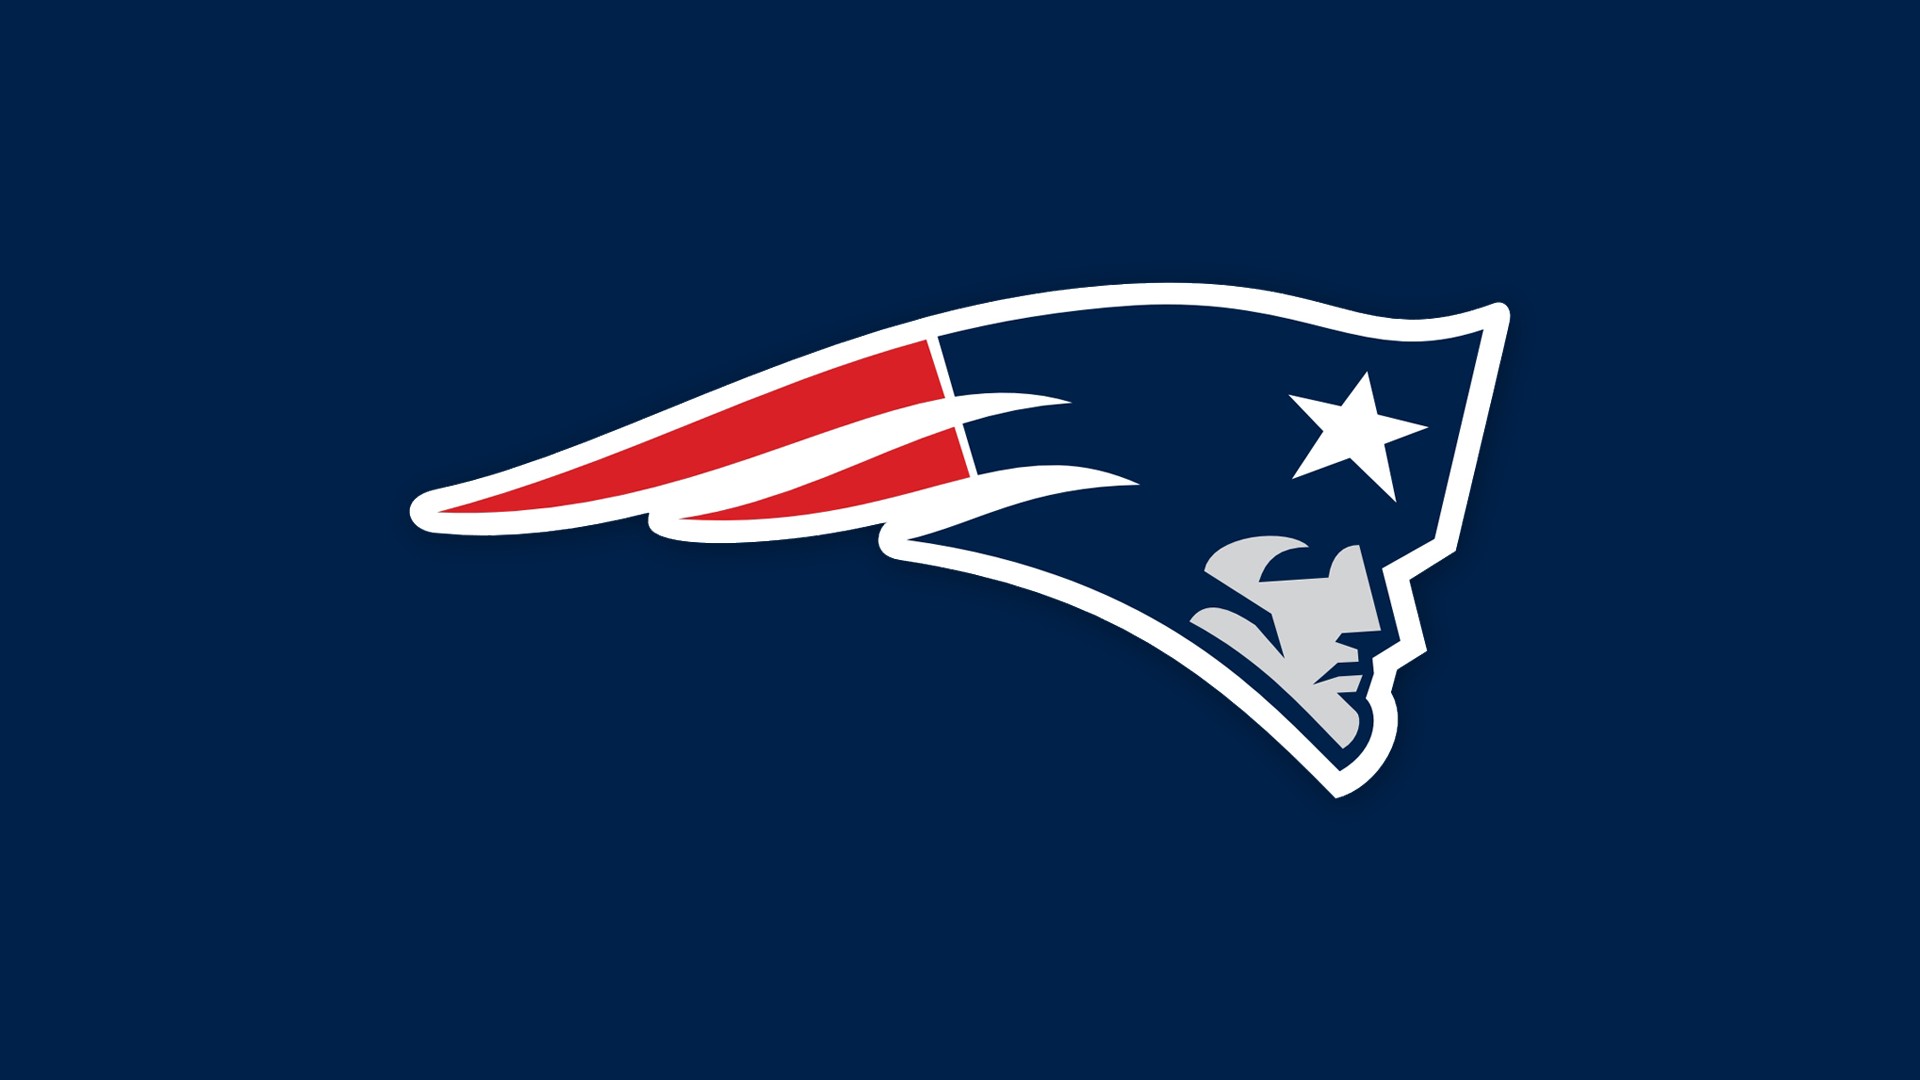 NE Patriots Backgrounds HD With Resolution 1920X1080 pixel. You can make this wallpaper for your Mac or Windows Desktop Background, iPhone, Android or Tablet and another Smartphone device for free